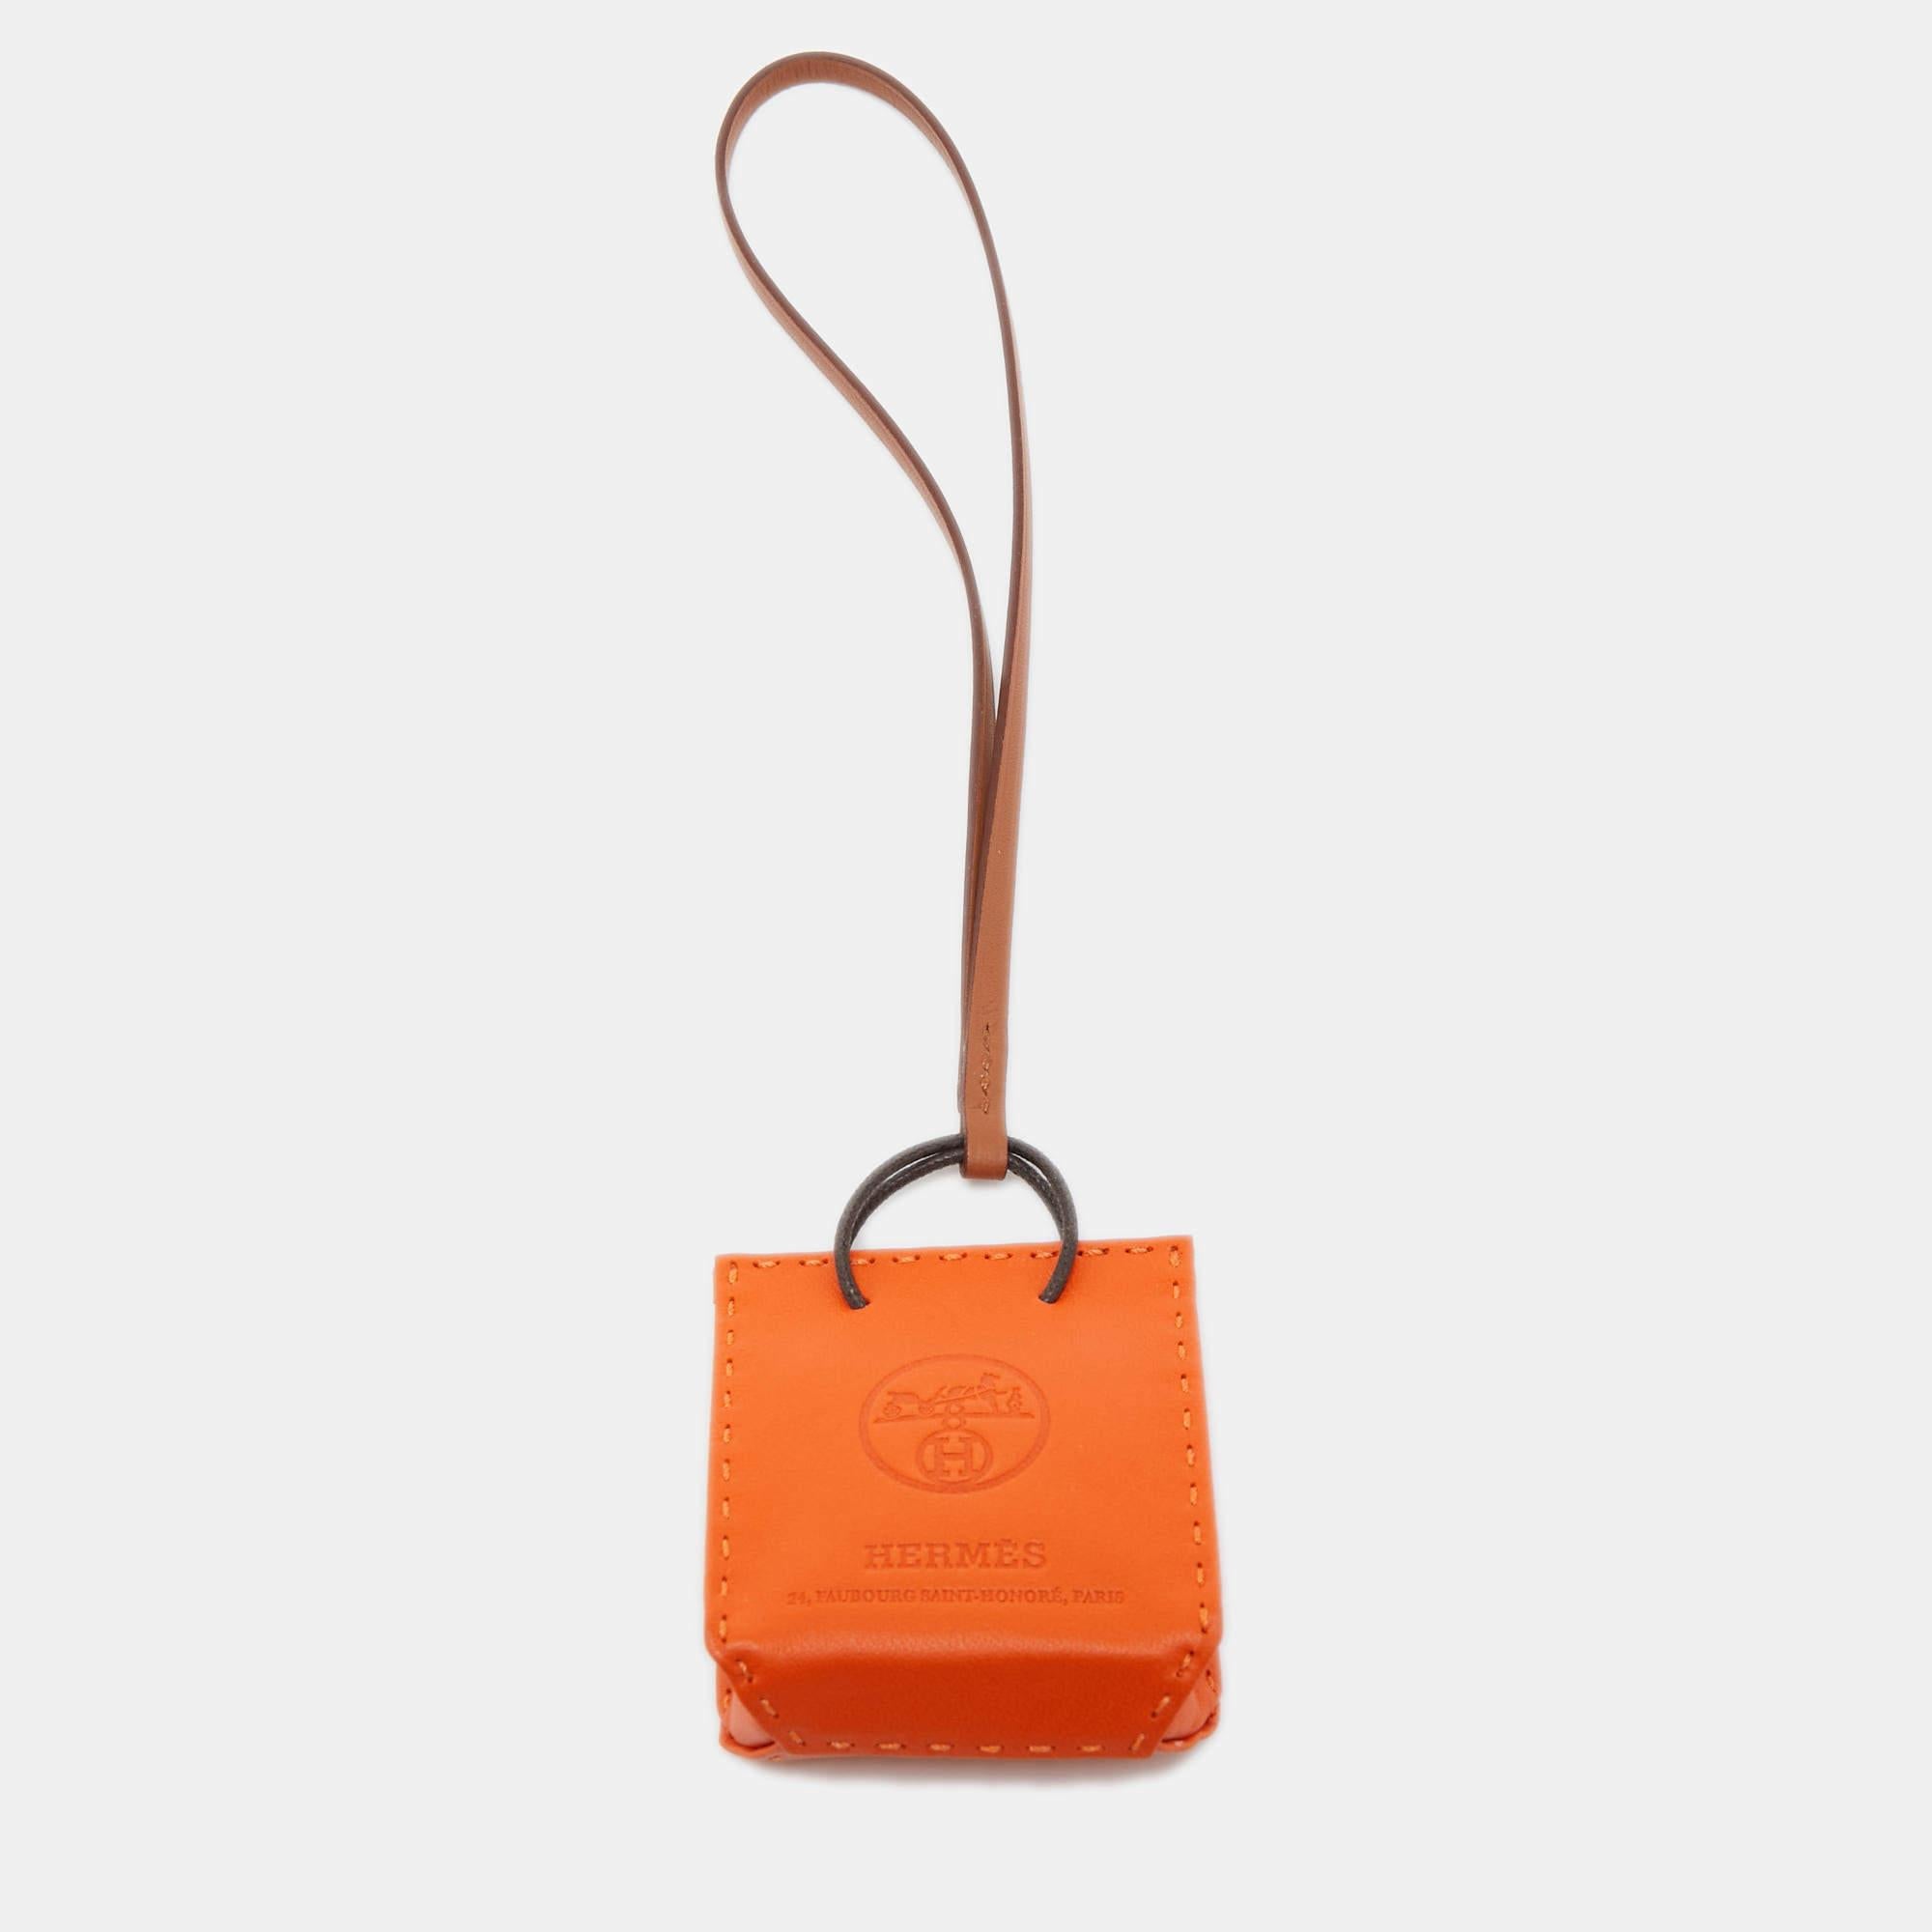 Lend your bag a luxe makeover with this stunning Hermes shopping bag charm. It is cut from leather in the shape of a bag and is held by a strap.

